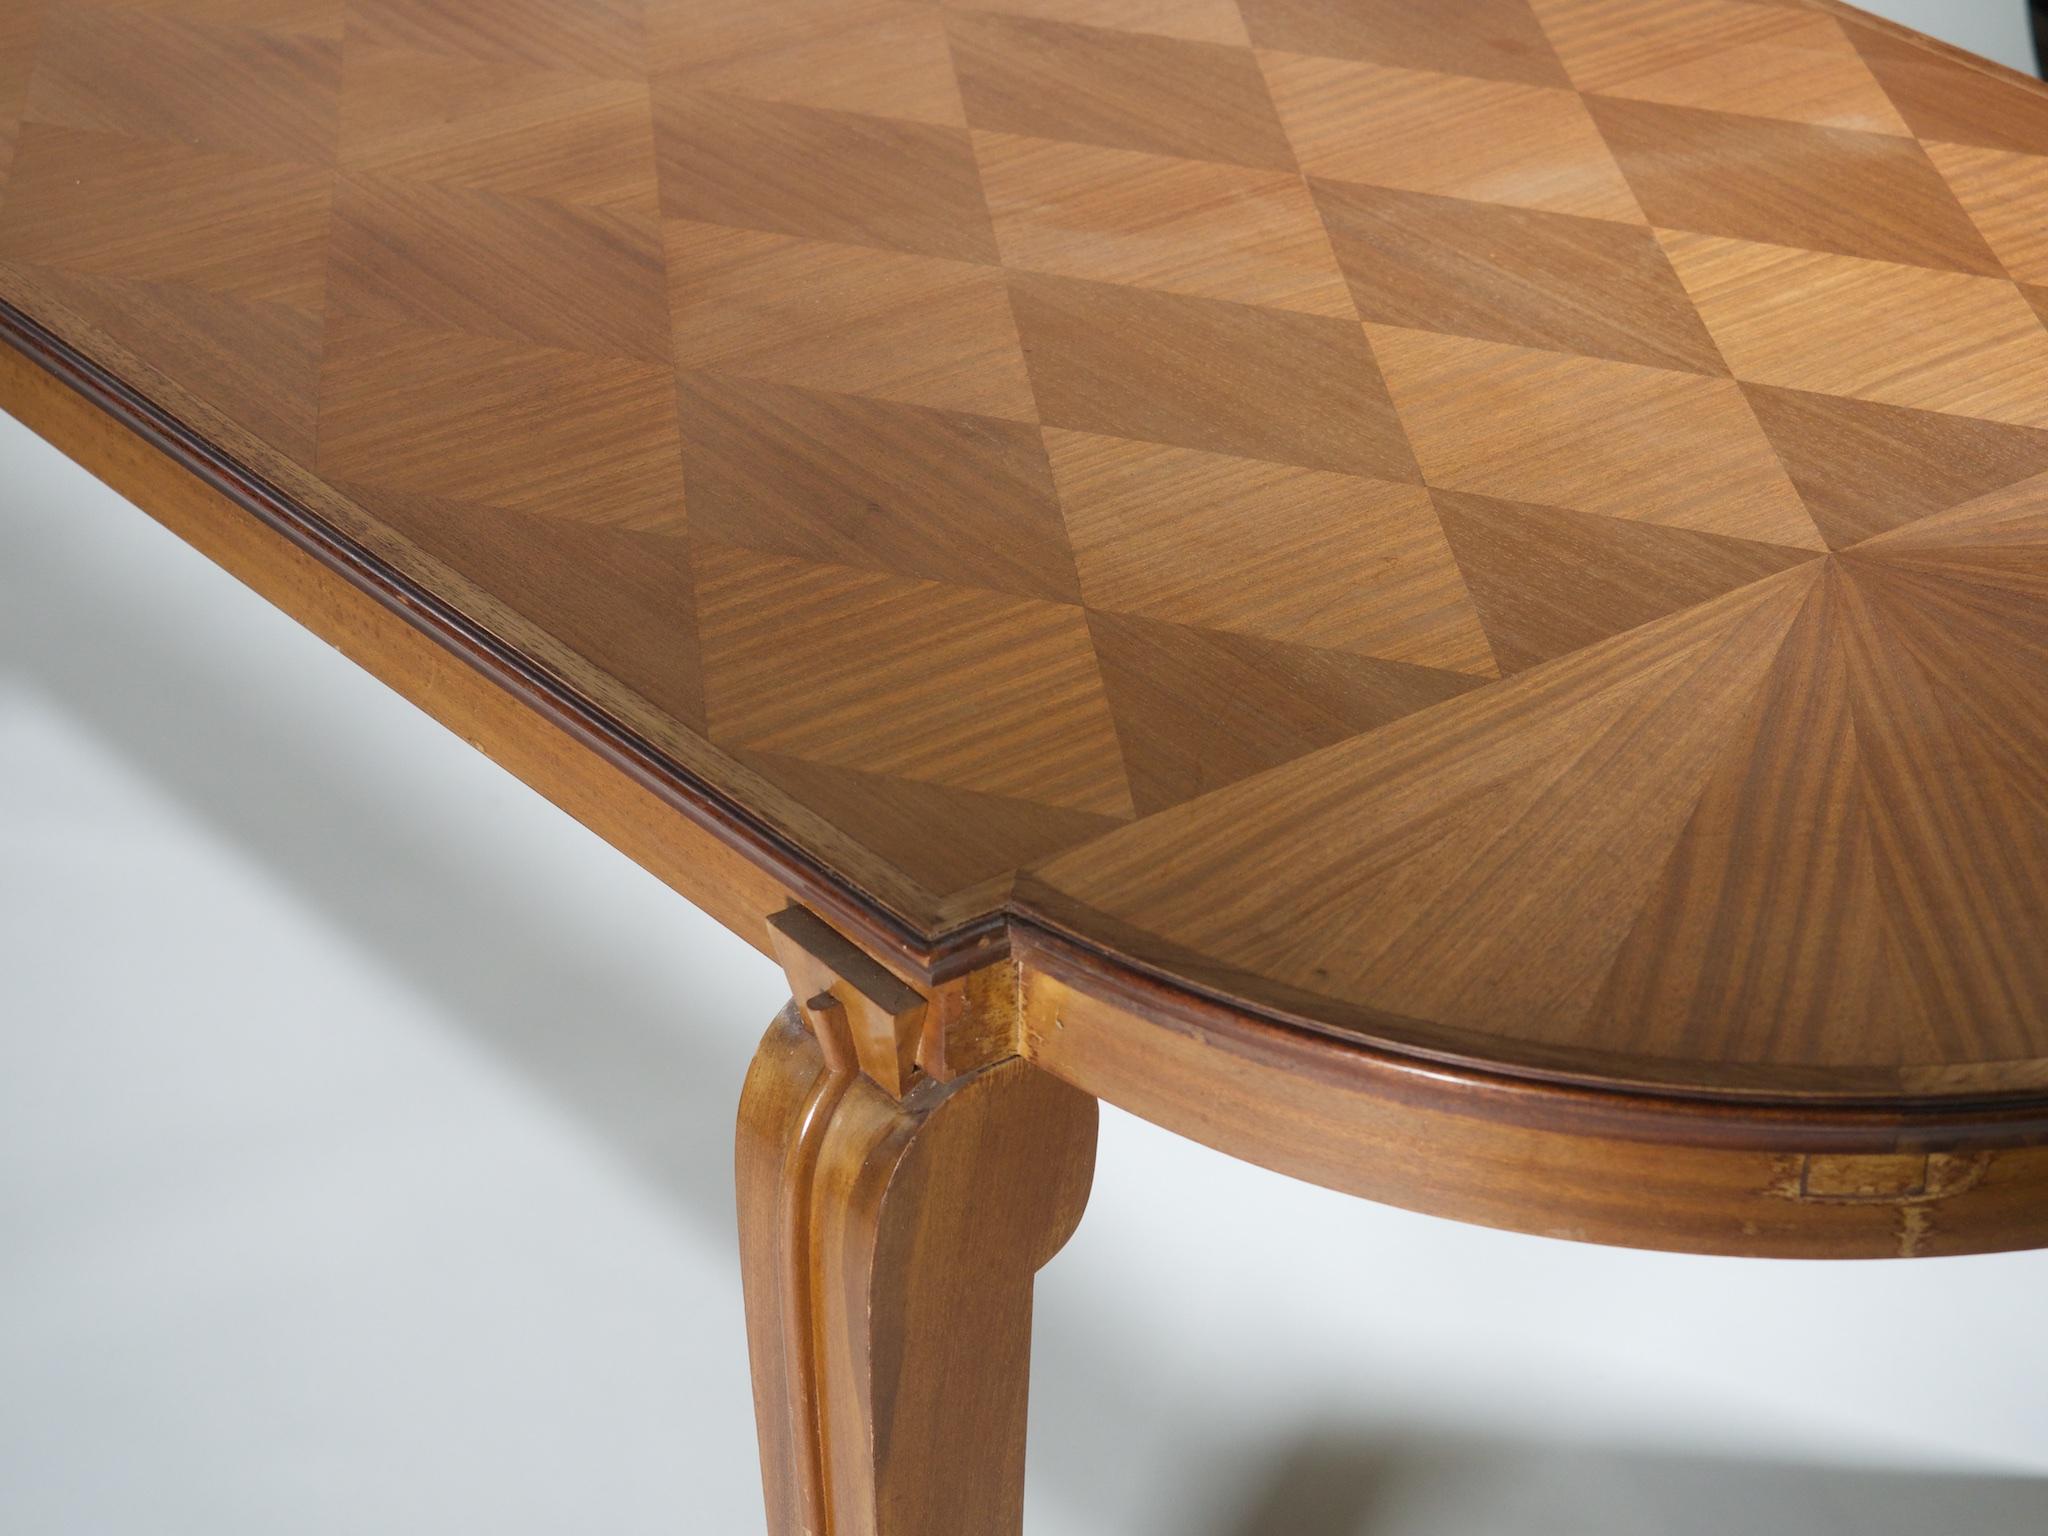 French Art Deco dining table by Andre Arbus, circa 1938, in mahogany. This signed and documented model is featured in the book, Andre Arbus, by Yvonne Brunhammer (1996) and a variant is presented in the October 1938 issue of Mobilier et Decoration